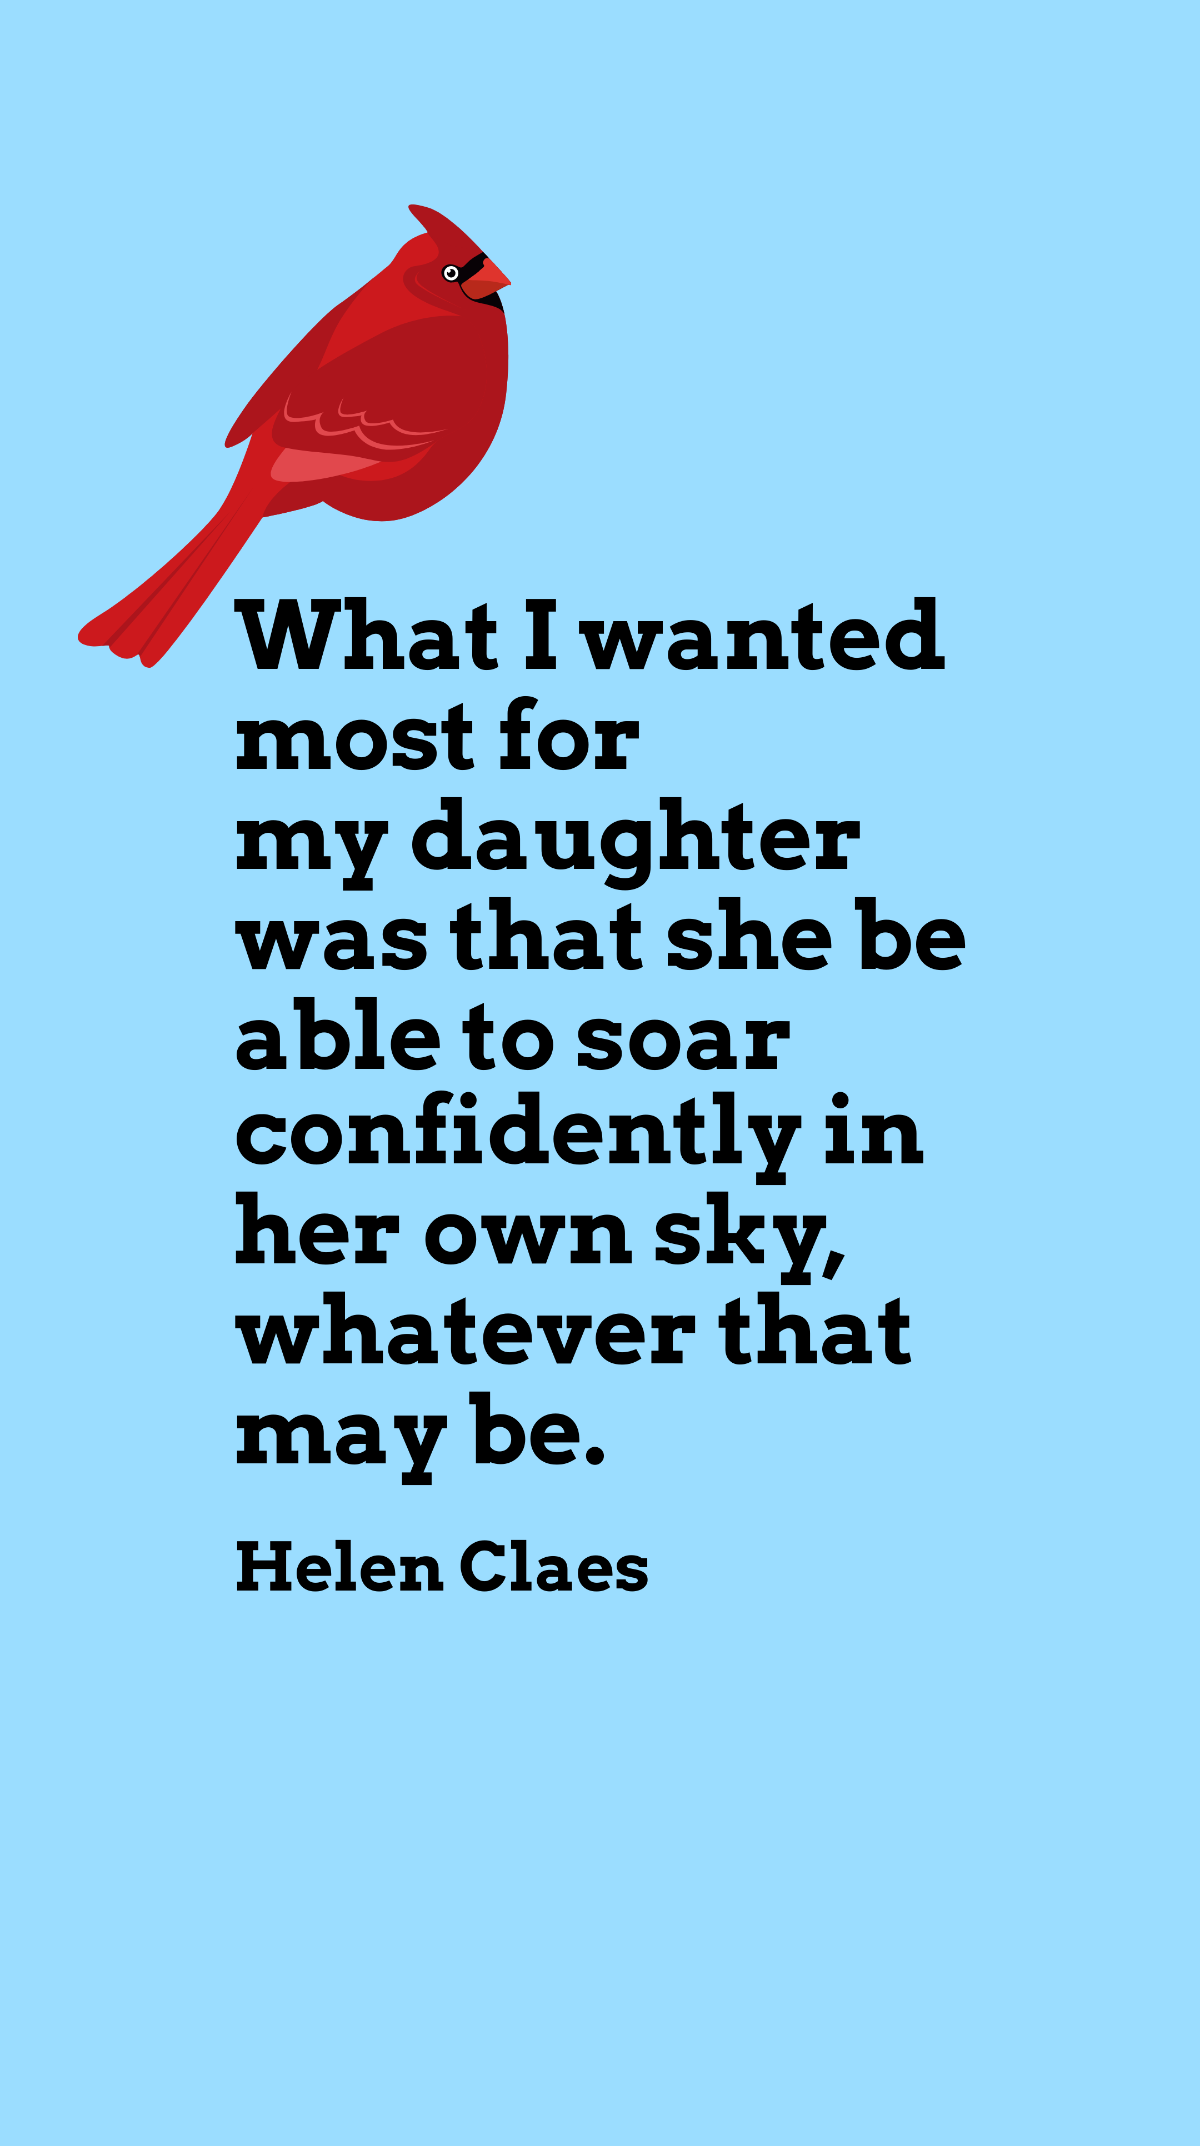 Helen Claes - What I wanted most for my daughter was that she be able to soar confidently in her own sky, whatever that may be. Template